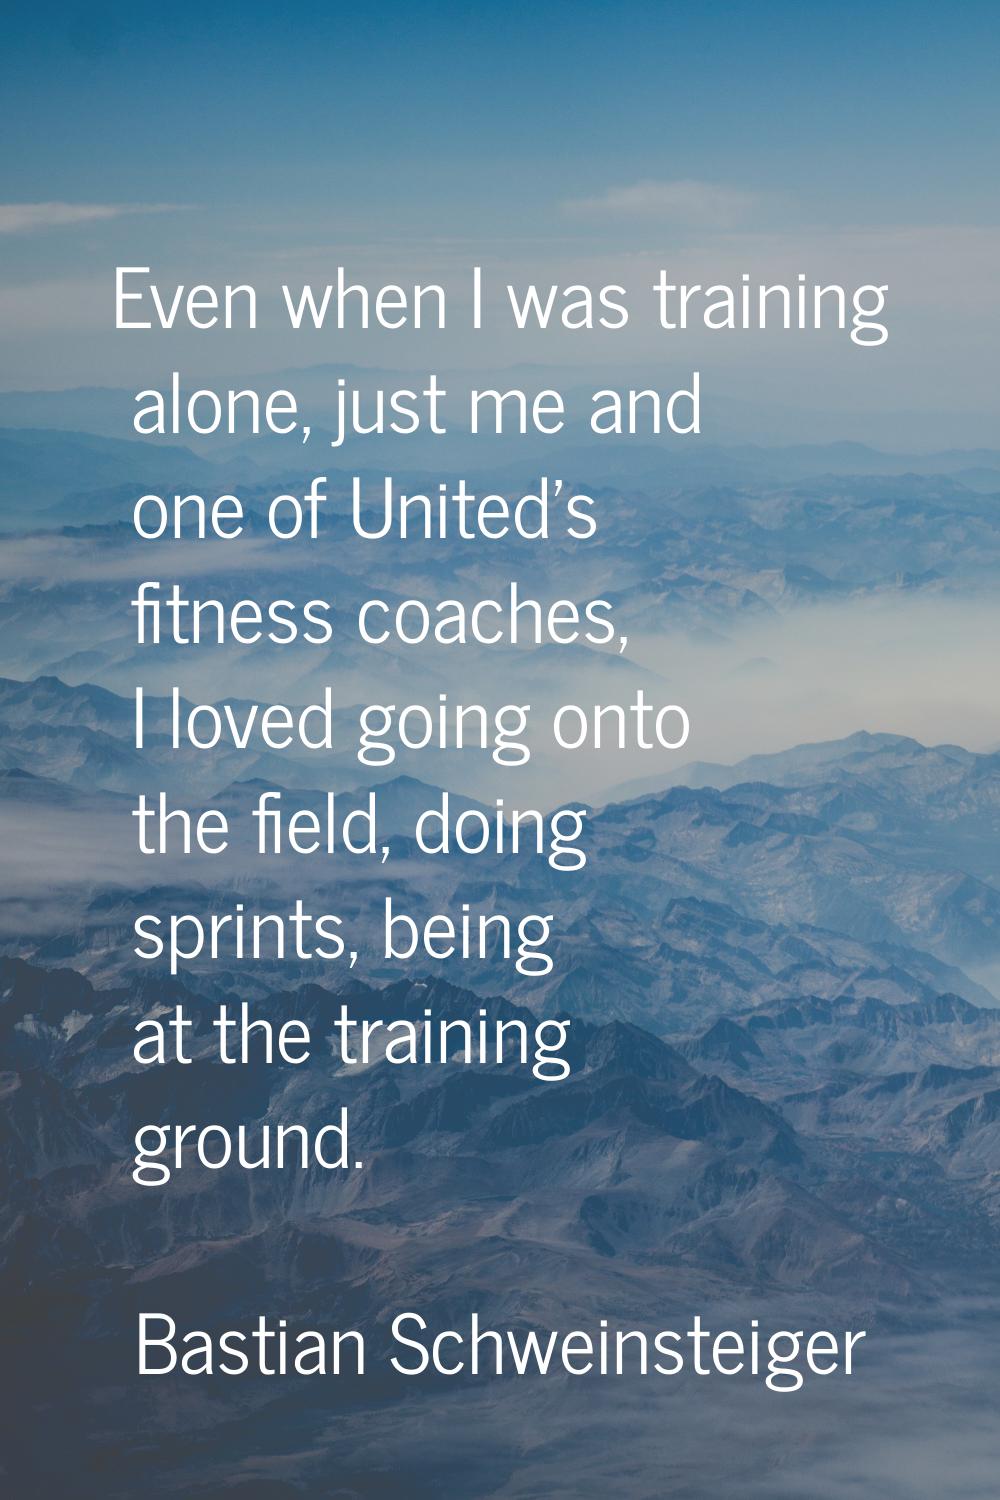 Even when I was training alone, just me and one of United's fitness coaches, I loved going onto the